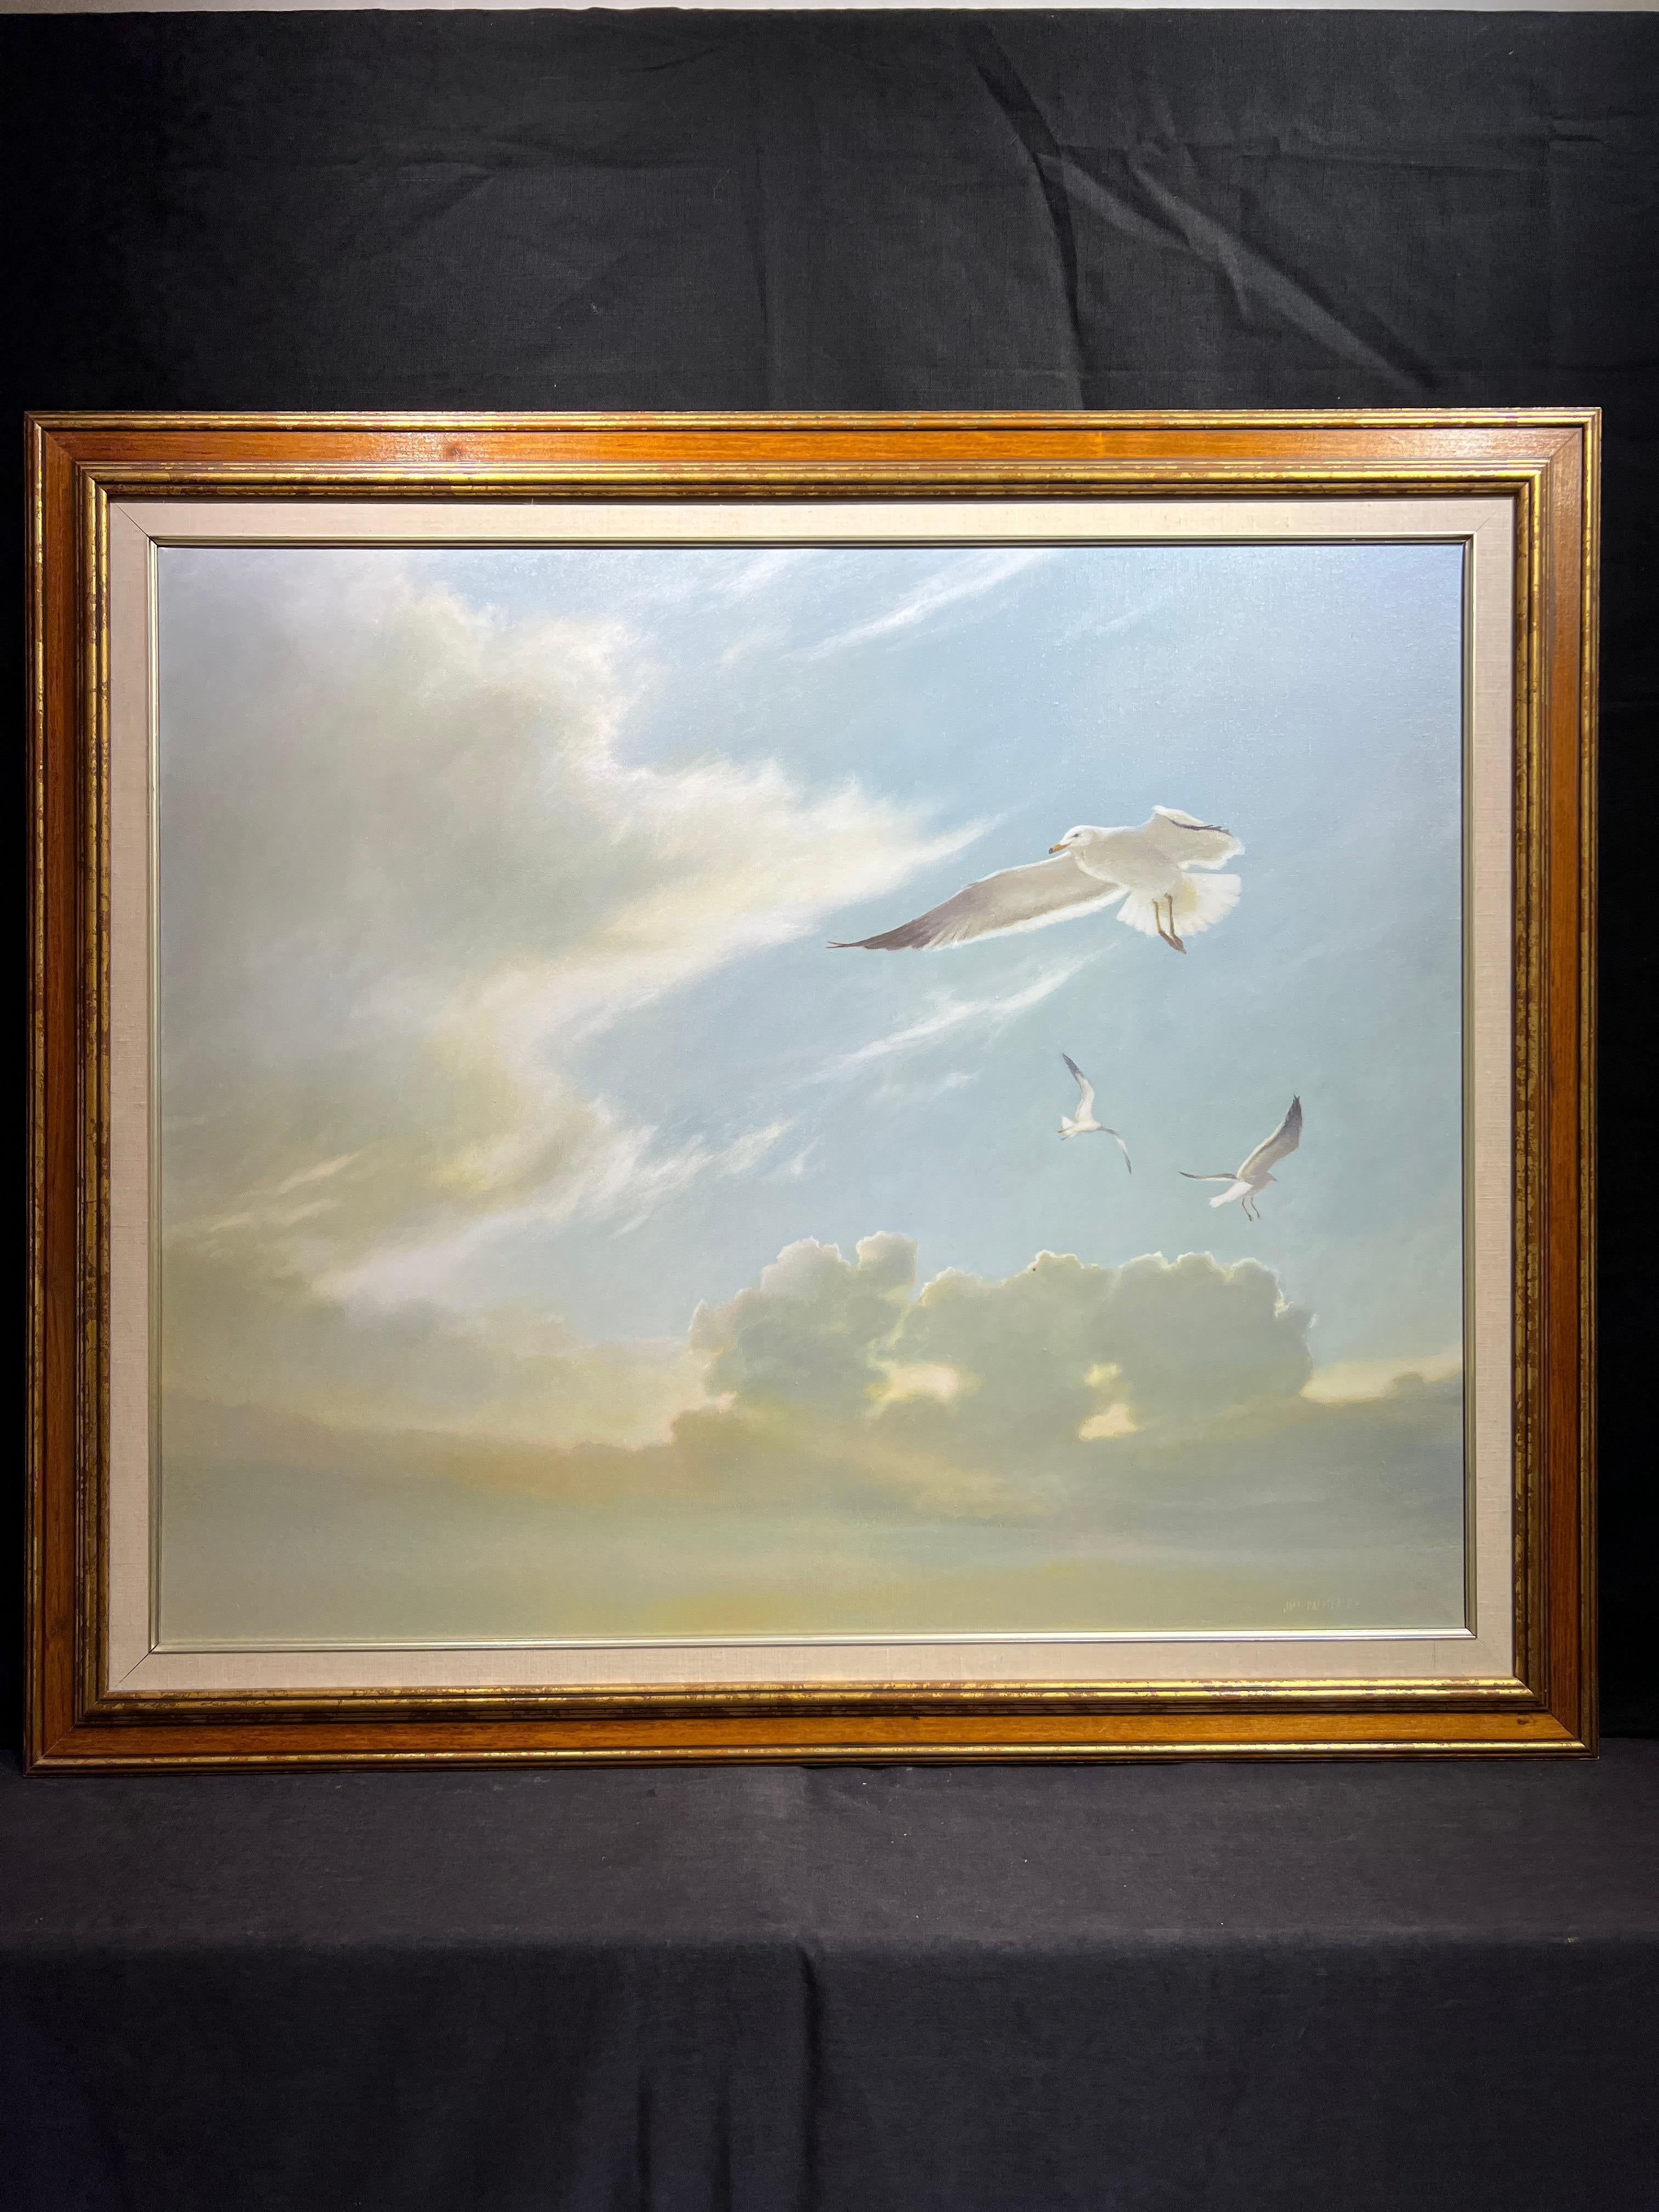 Seagulls (Birds in Flight) - Painting by Jim Palmer